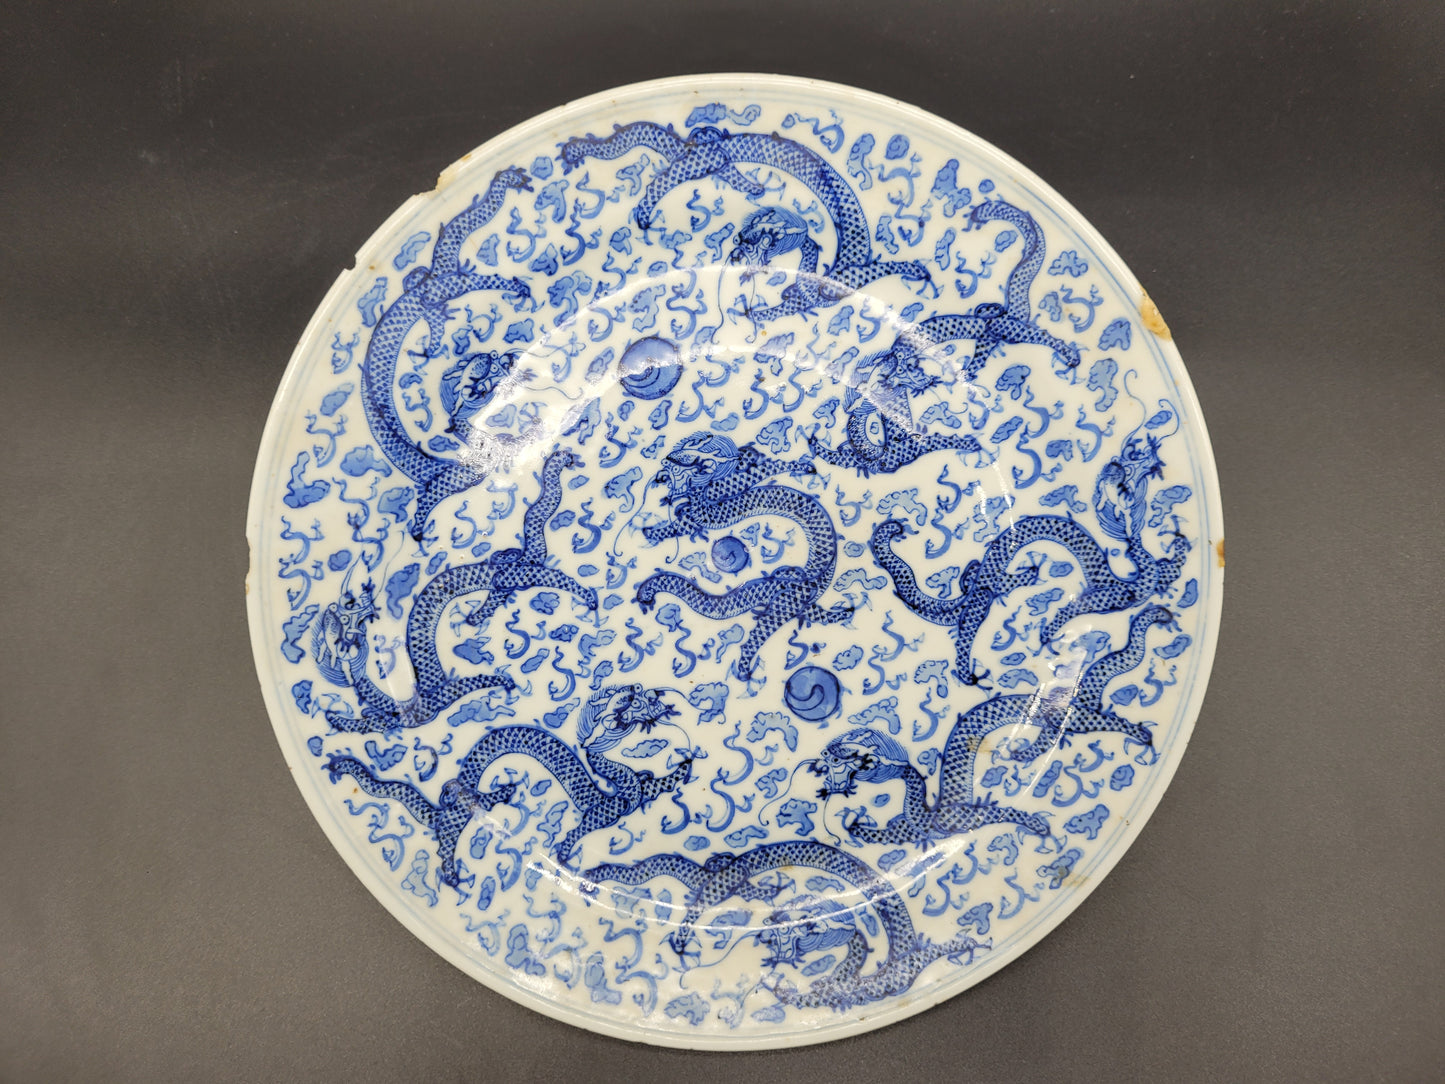 ANTIQUES ONLINE USA Beautiful Chinese Kangxi Period ( 1662-1722 ) Blue and White Dragon Plate 